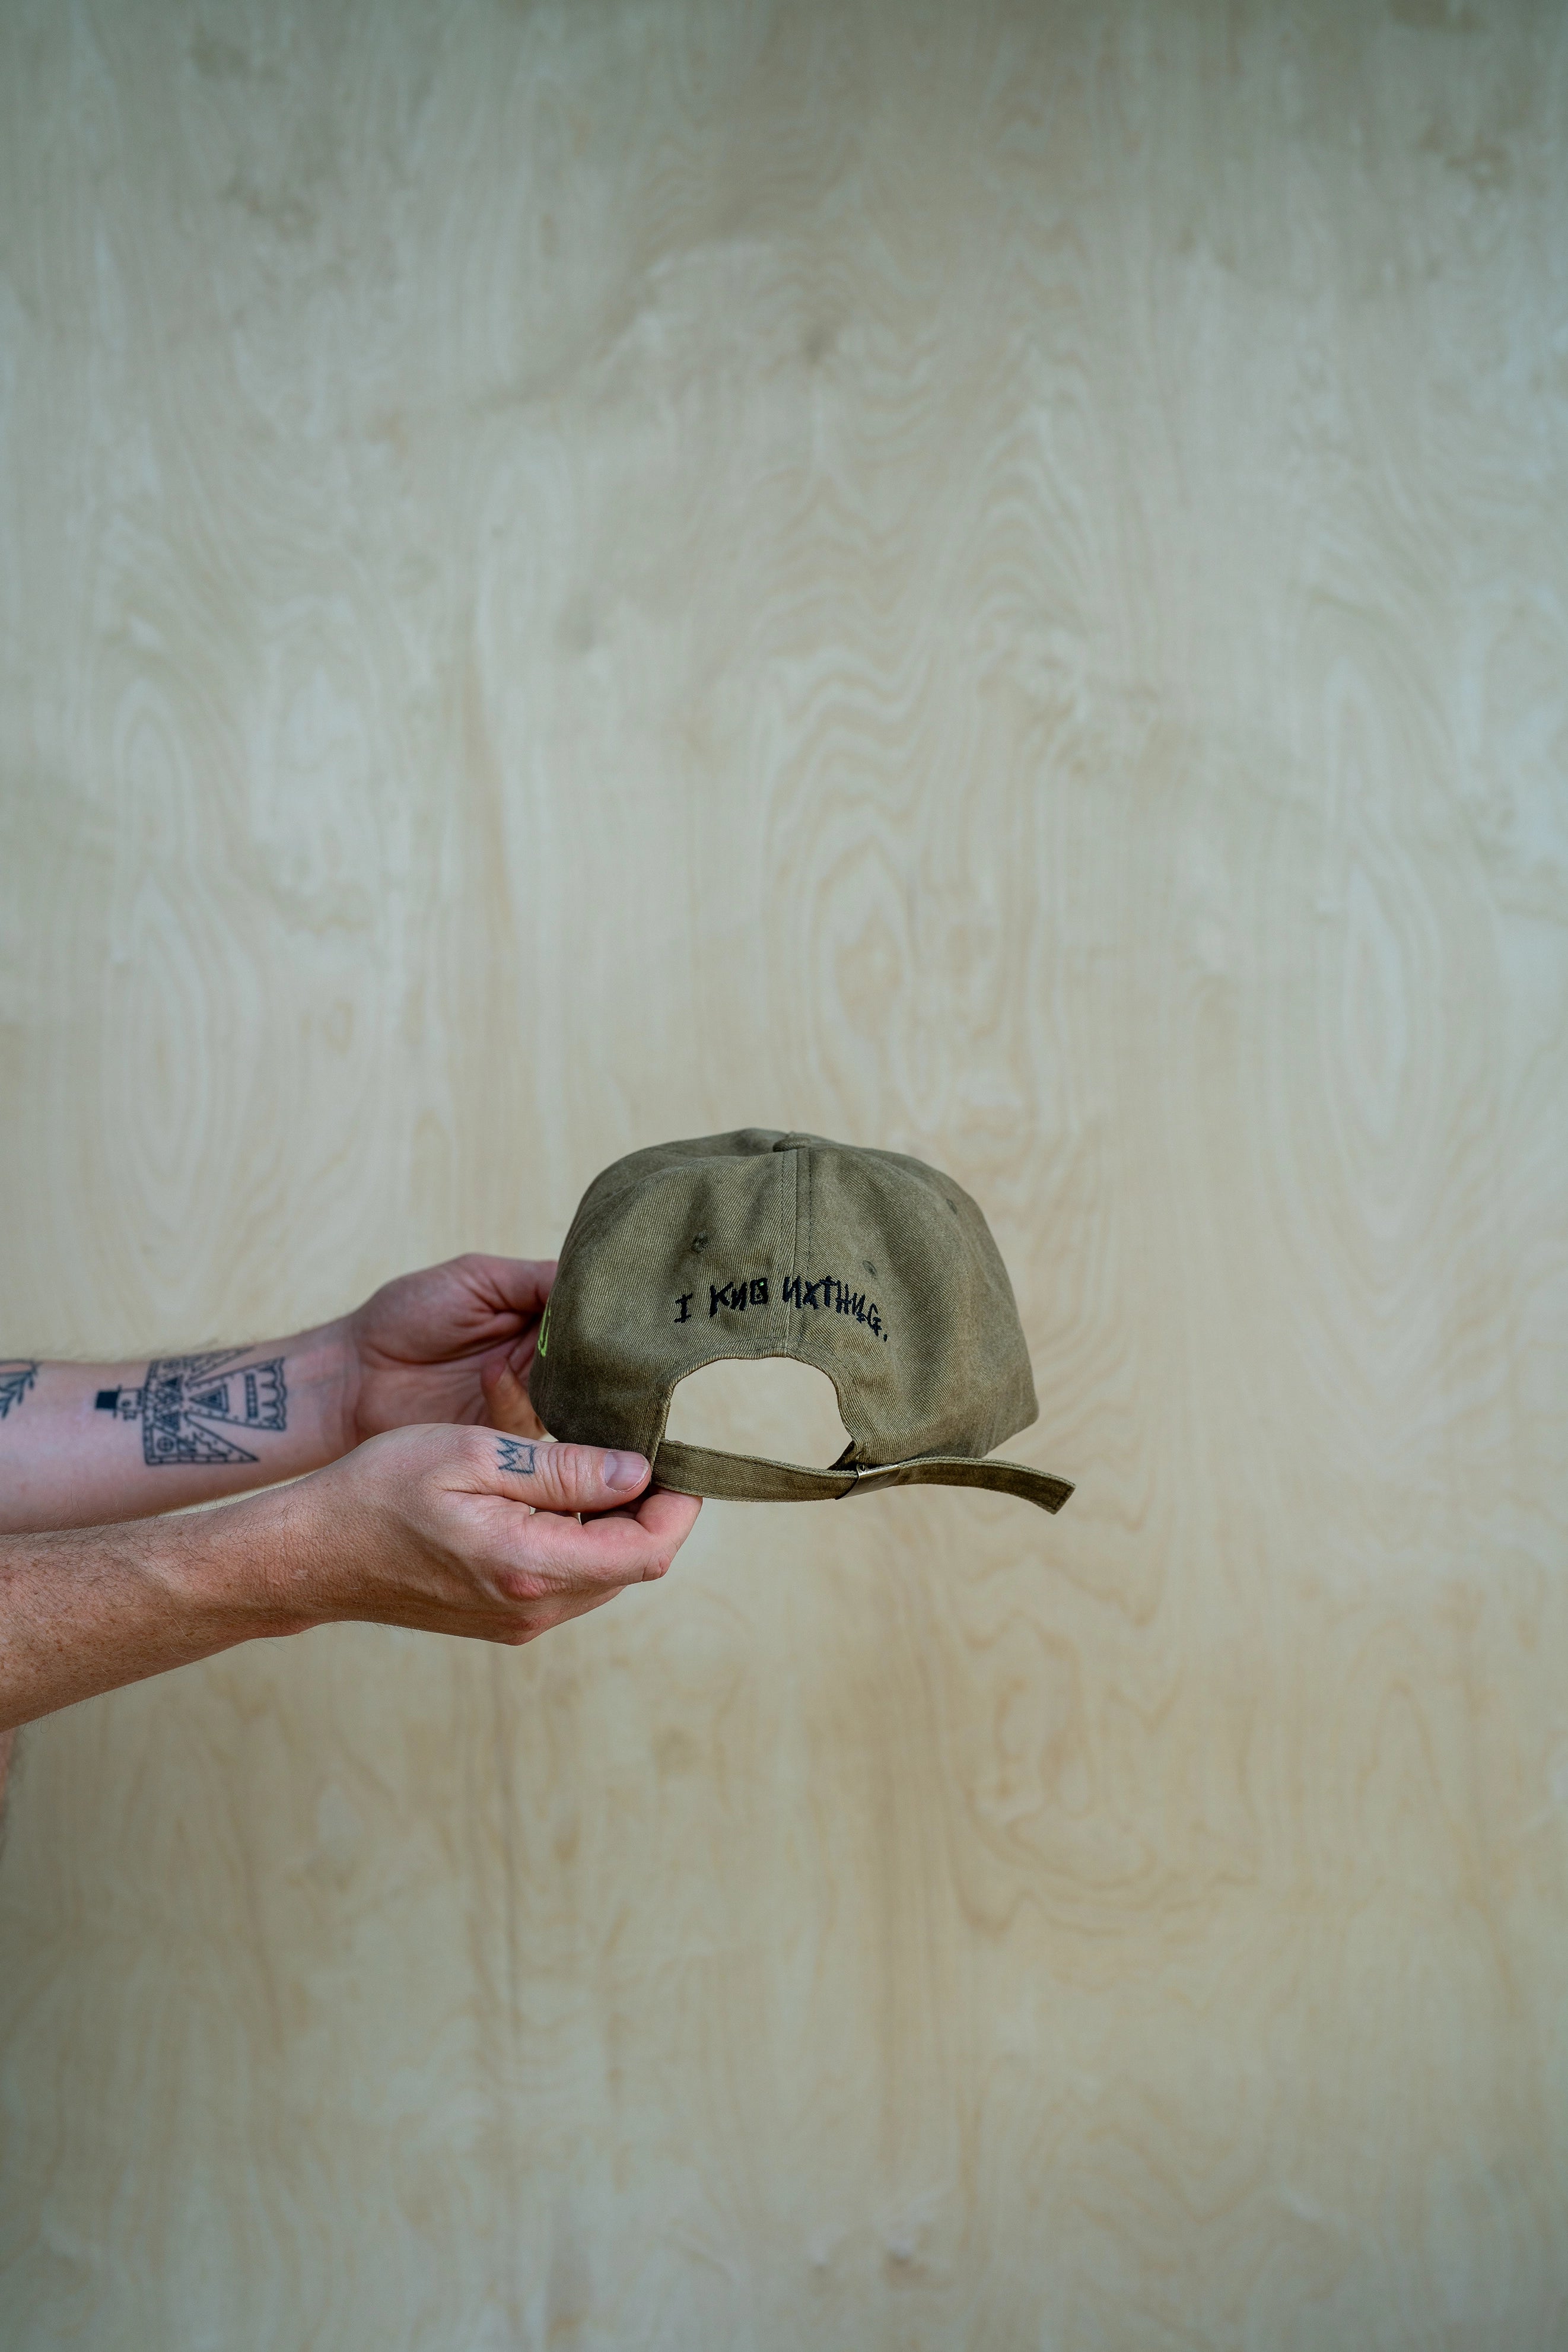 Embroidered Bax "I knø nxthing" Hat